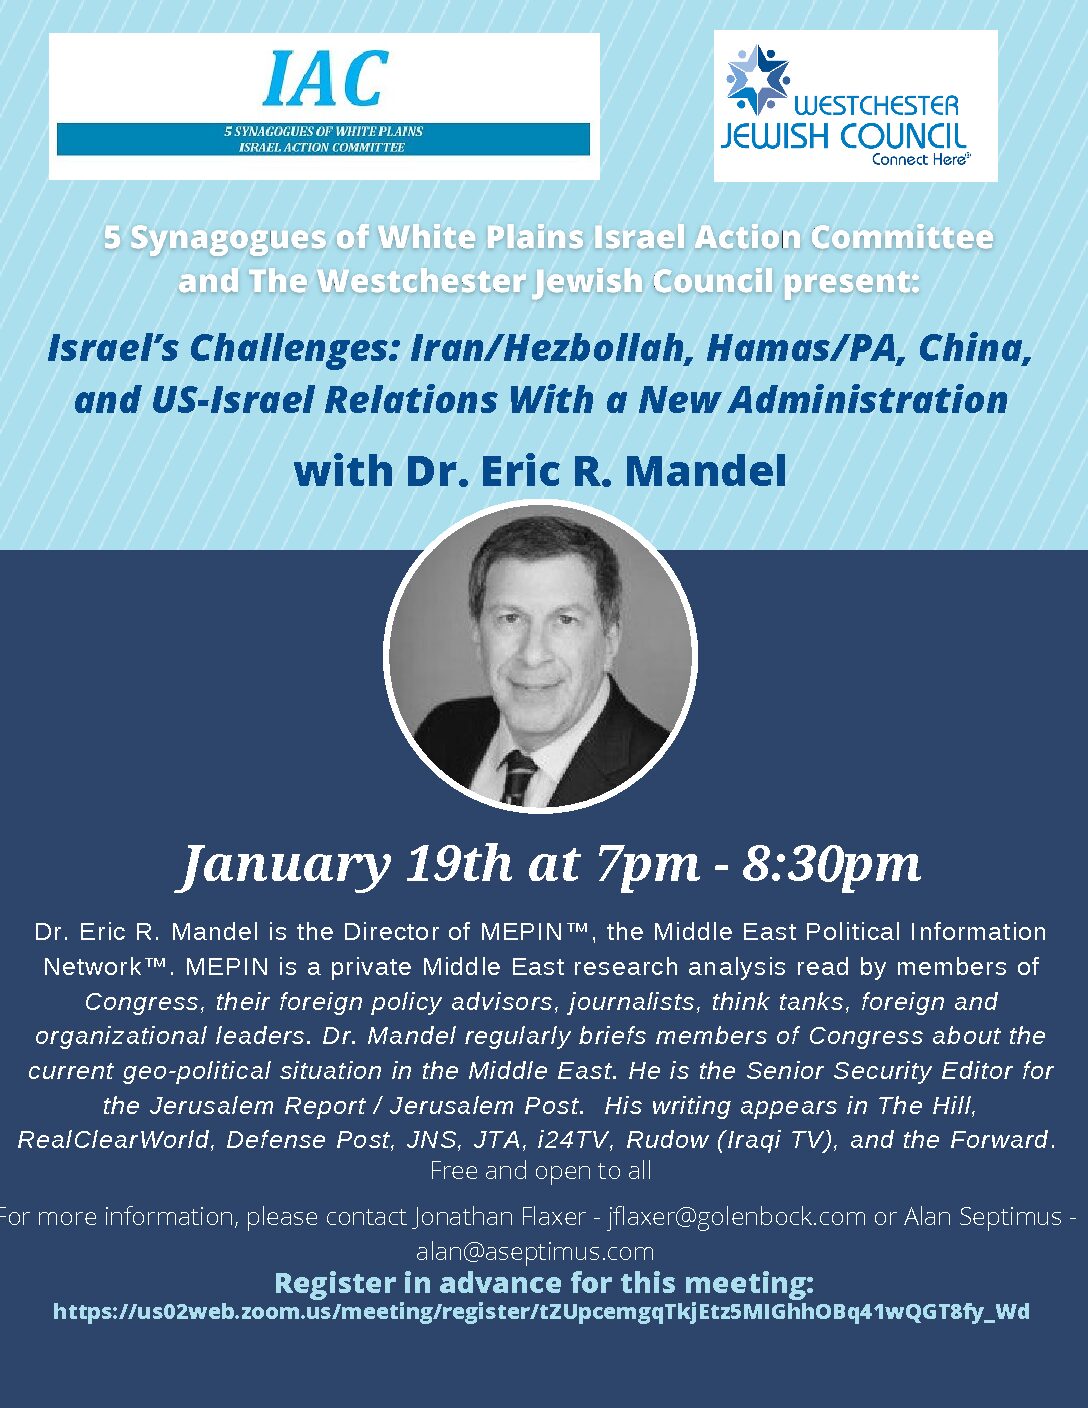 5 Synagogues of White Plains Israel Action Committee and the Westchester Jewish Council present Israel's Challenges: Iran/Hezbollah, Hamas/PA, China, and US Israel Relations with a New Administration